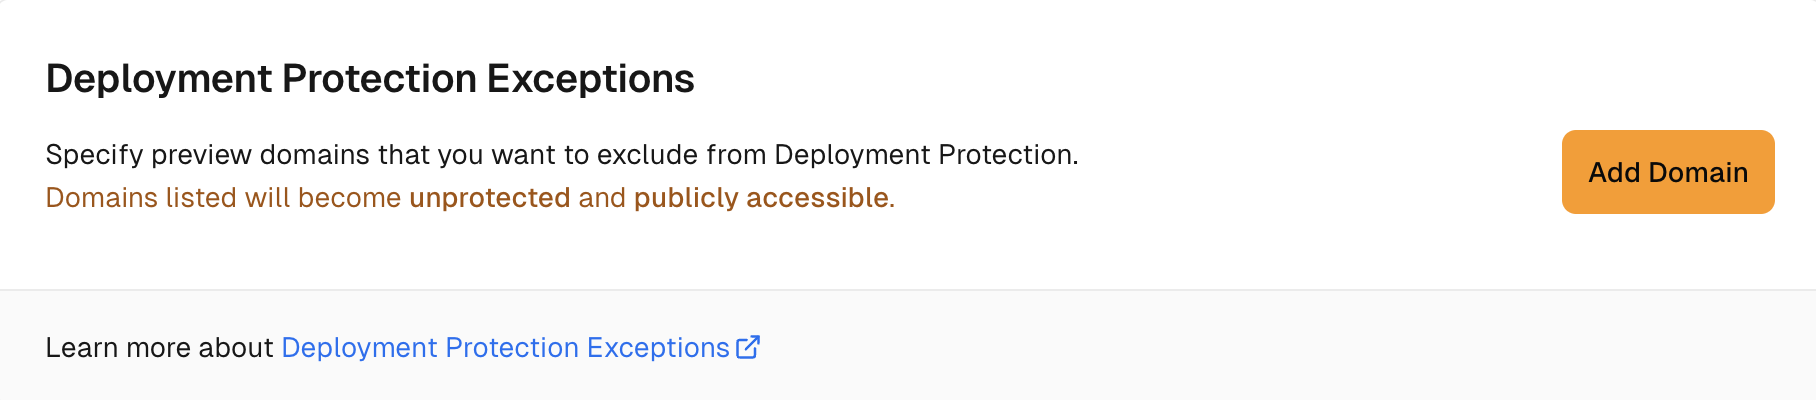 Add Deployment Protection Exception.